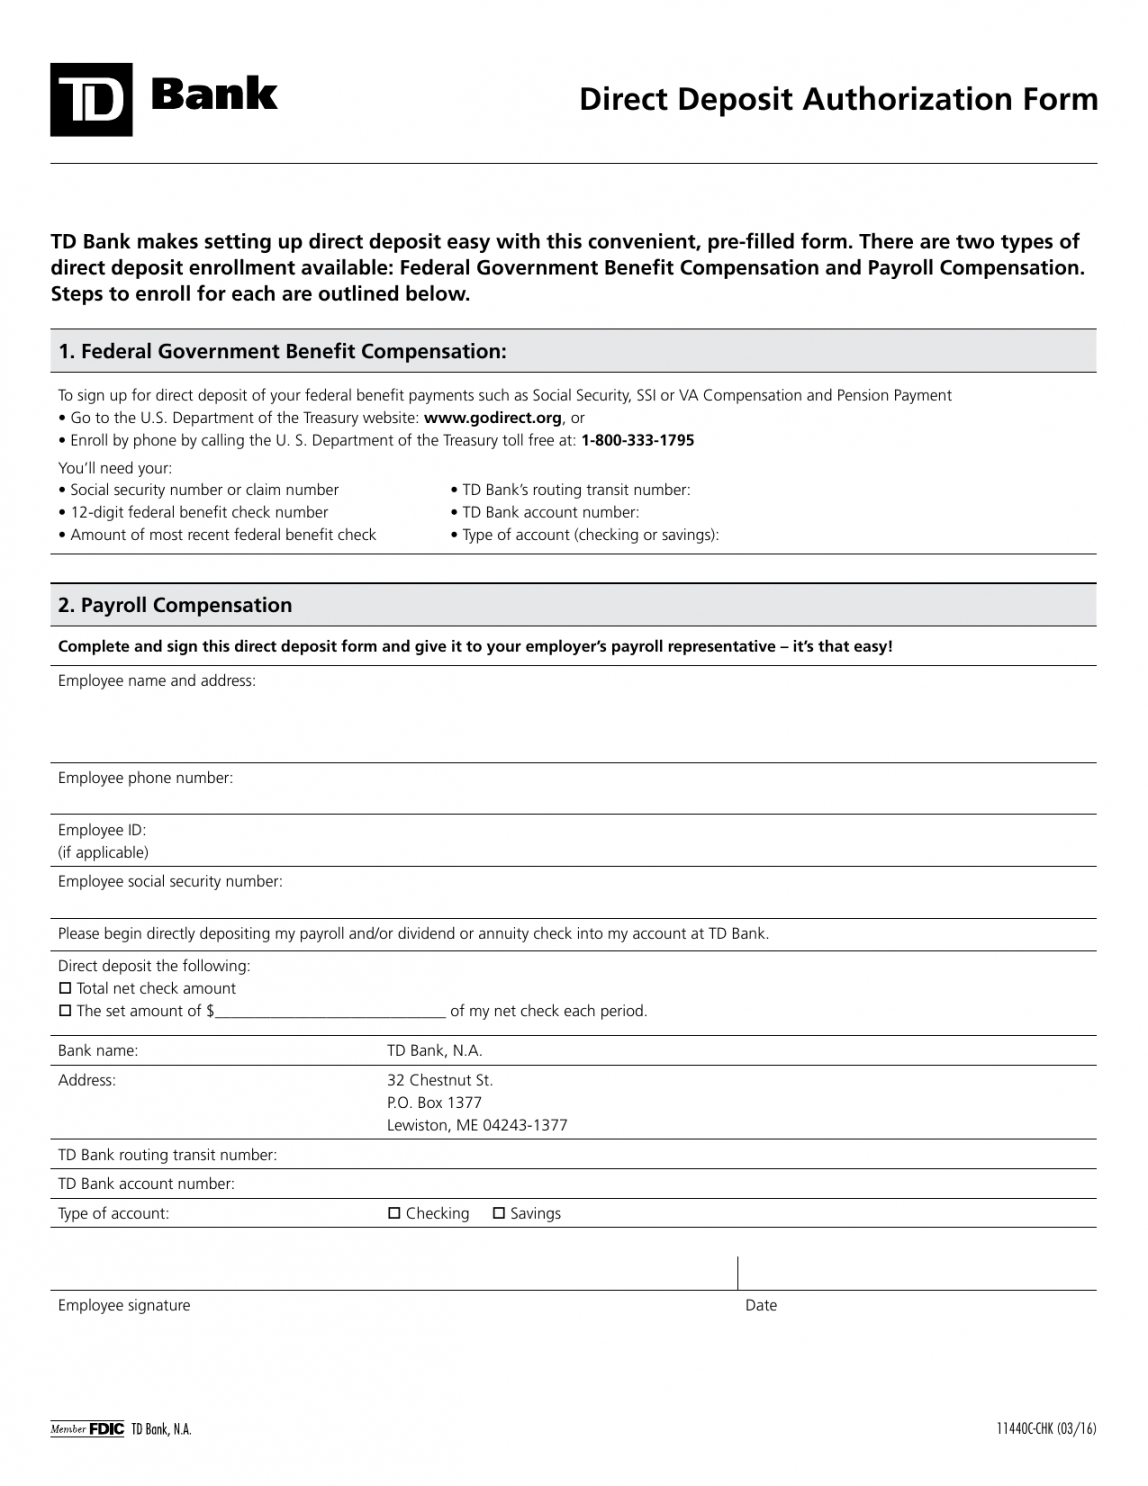 td federal government direct deposit form word